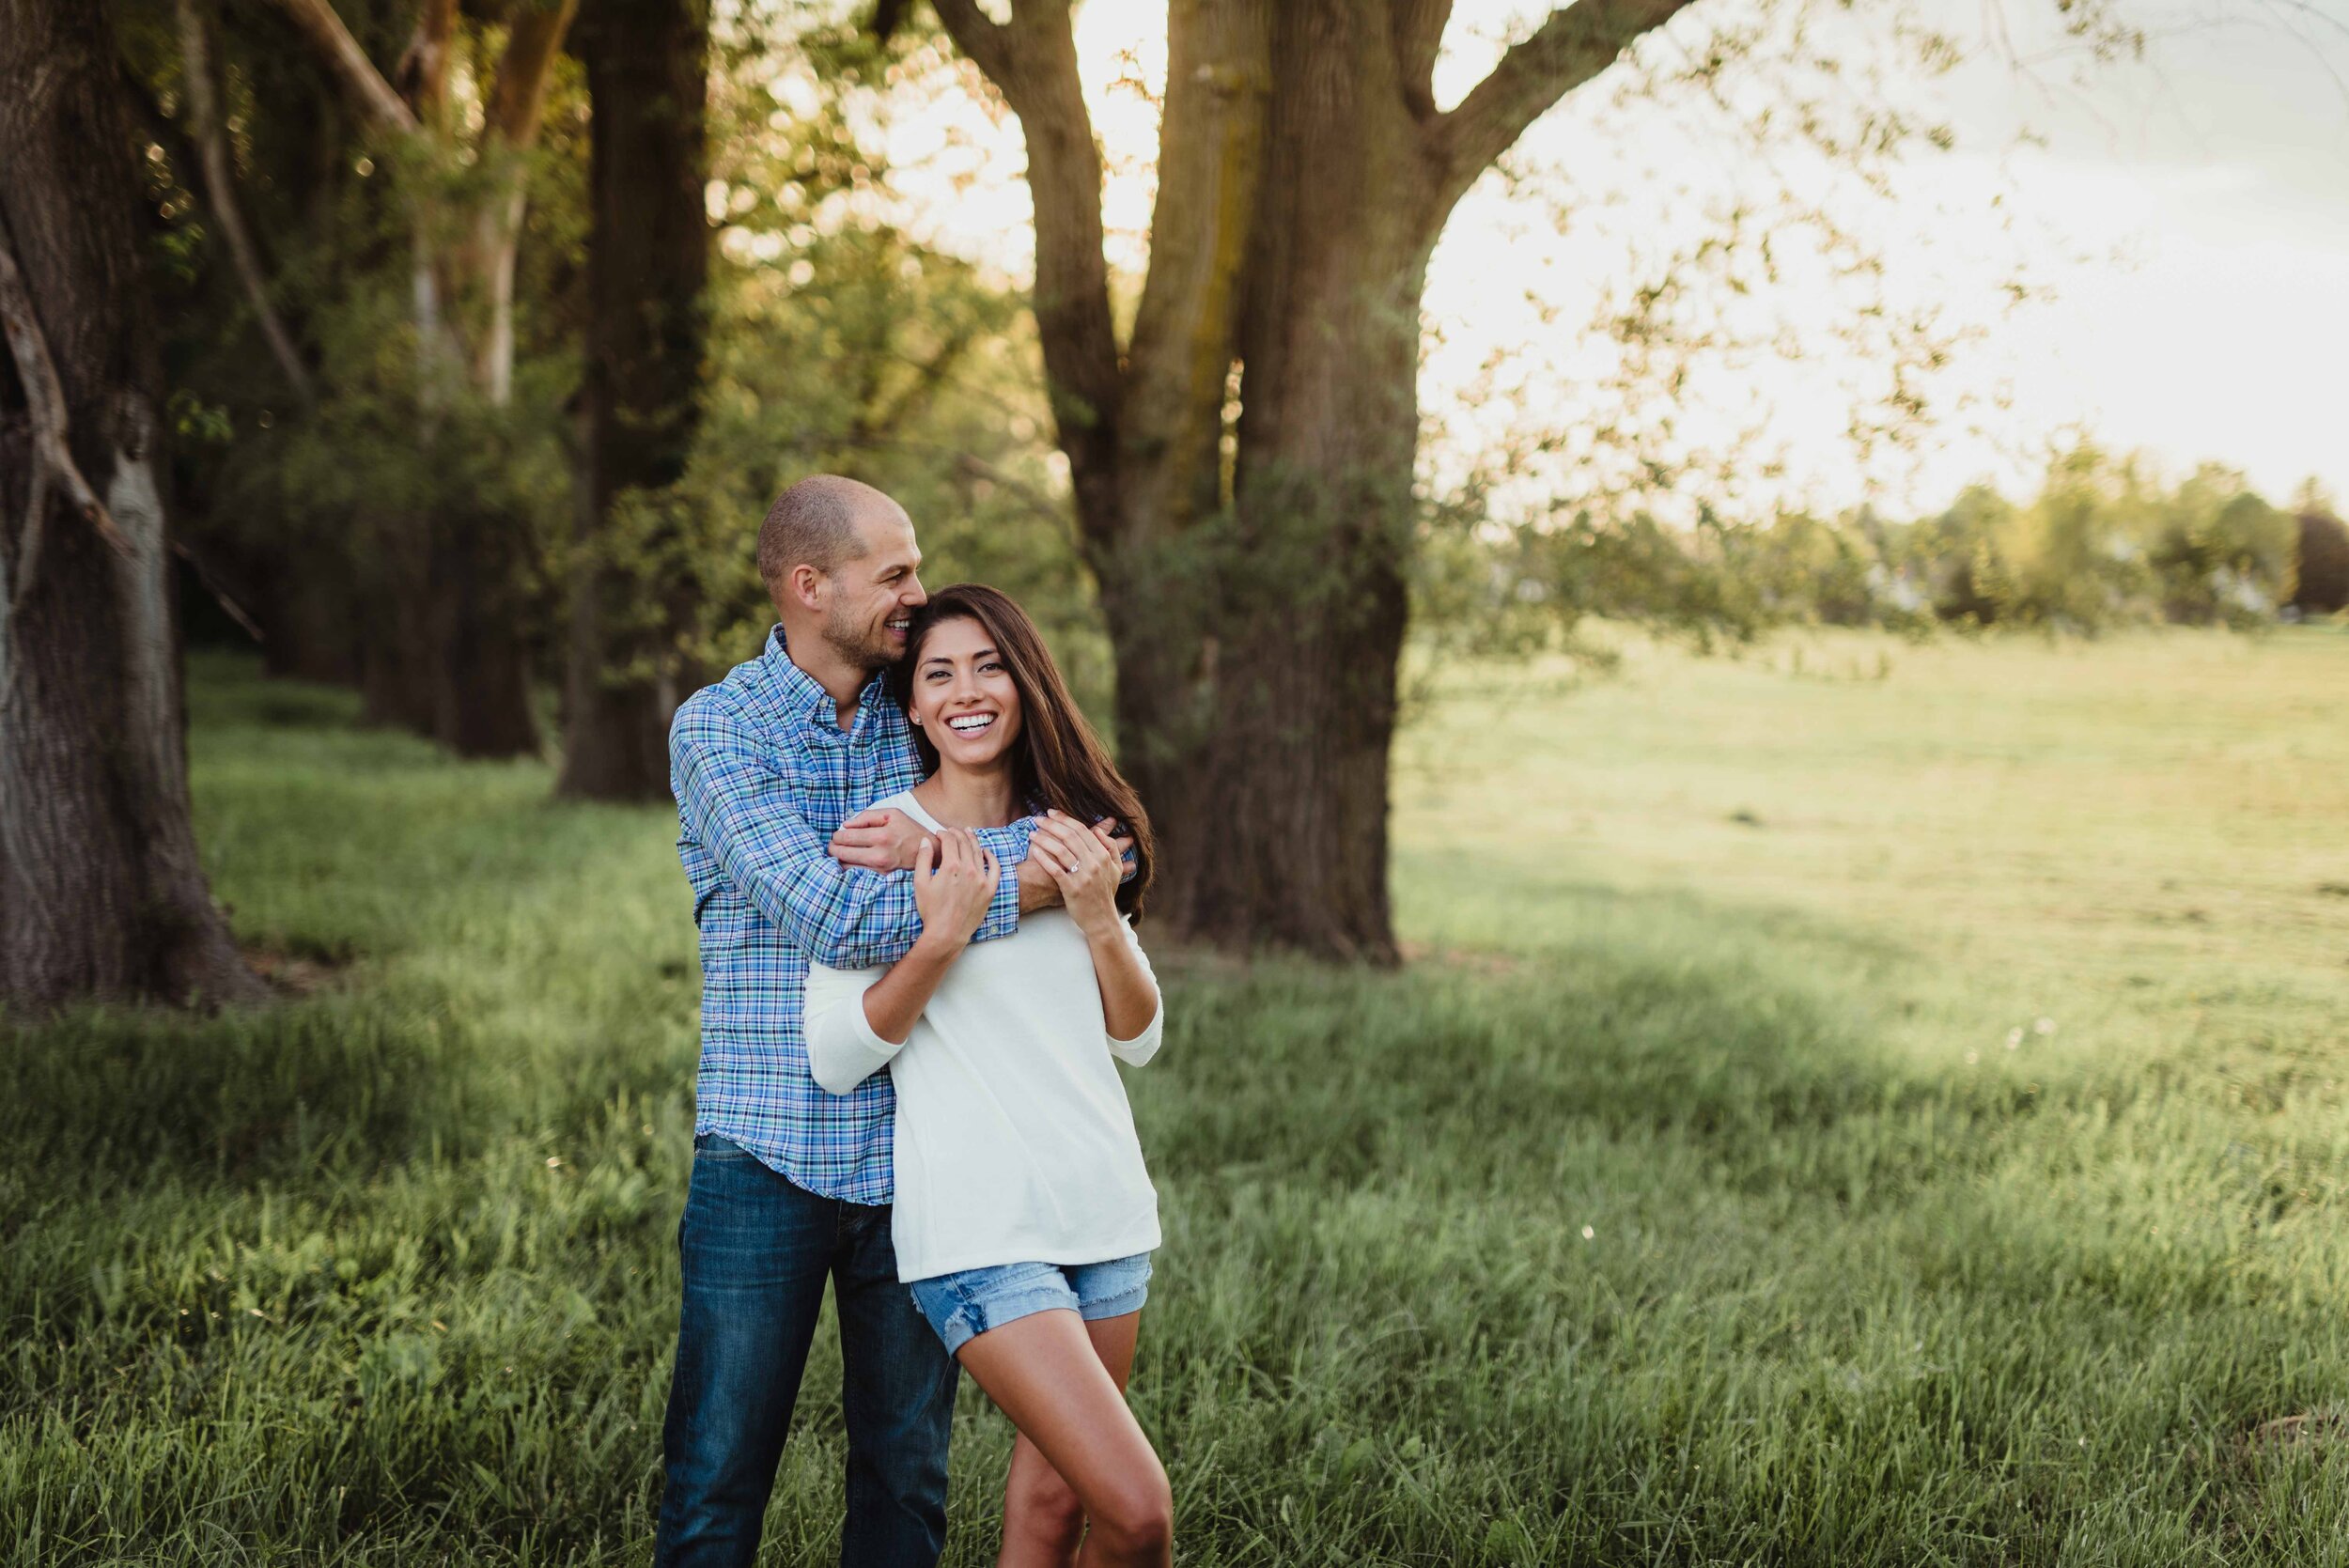 Lauren and Zach’s summer engagement photo session in Lafayette, Indiana at golden hour in an natural field